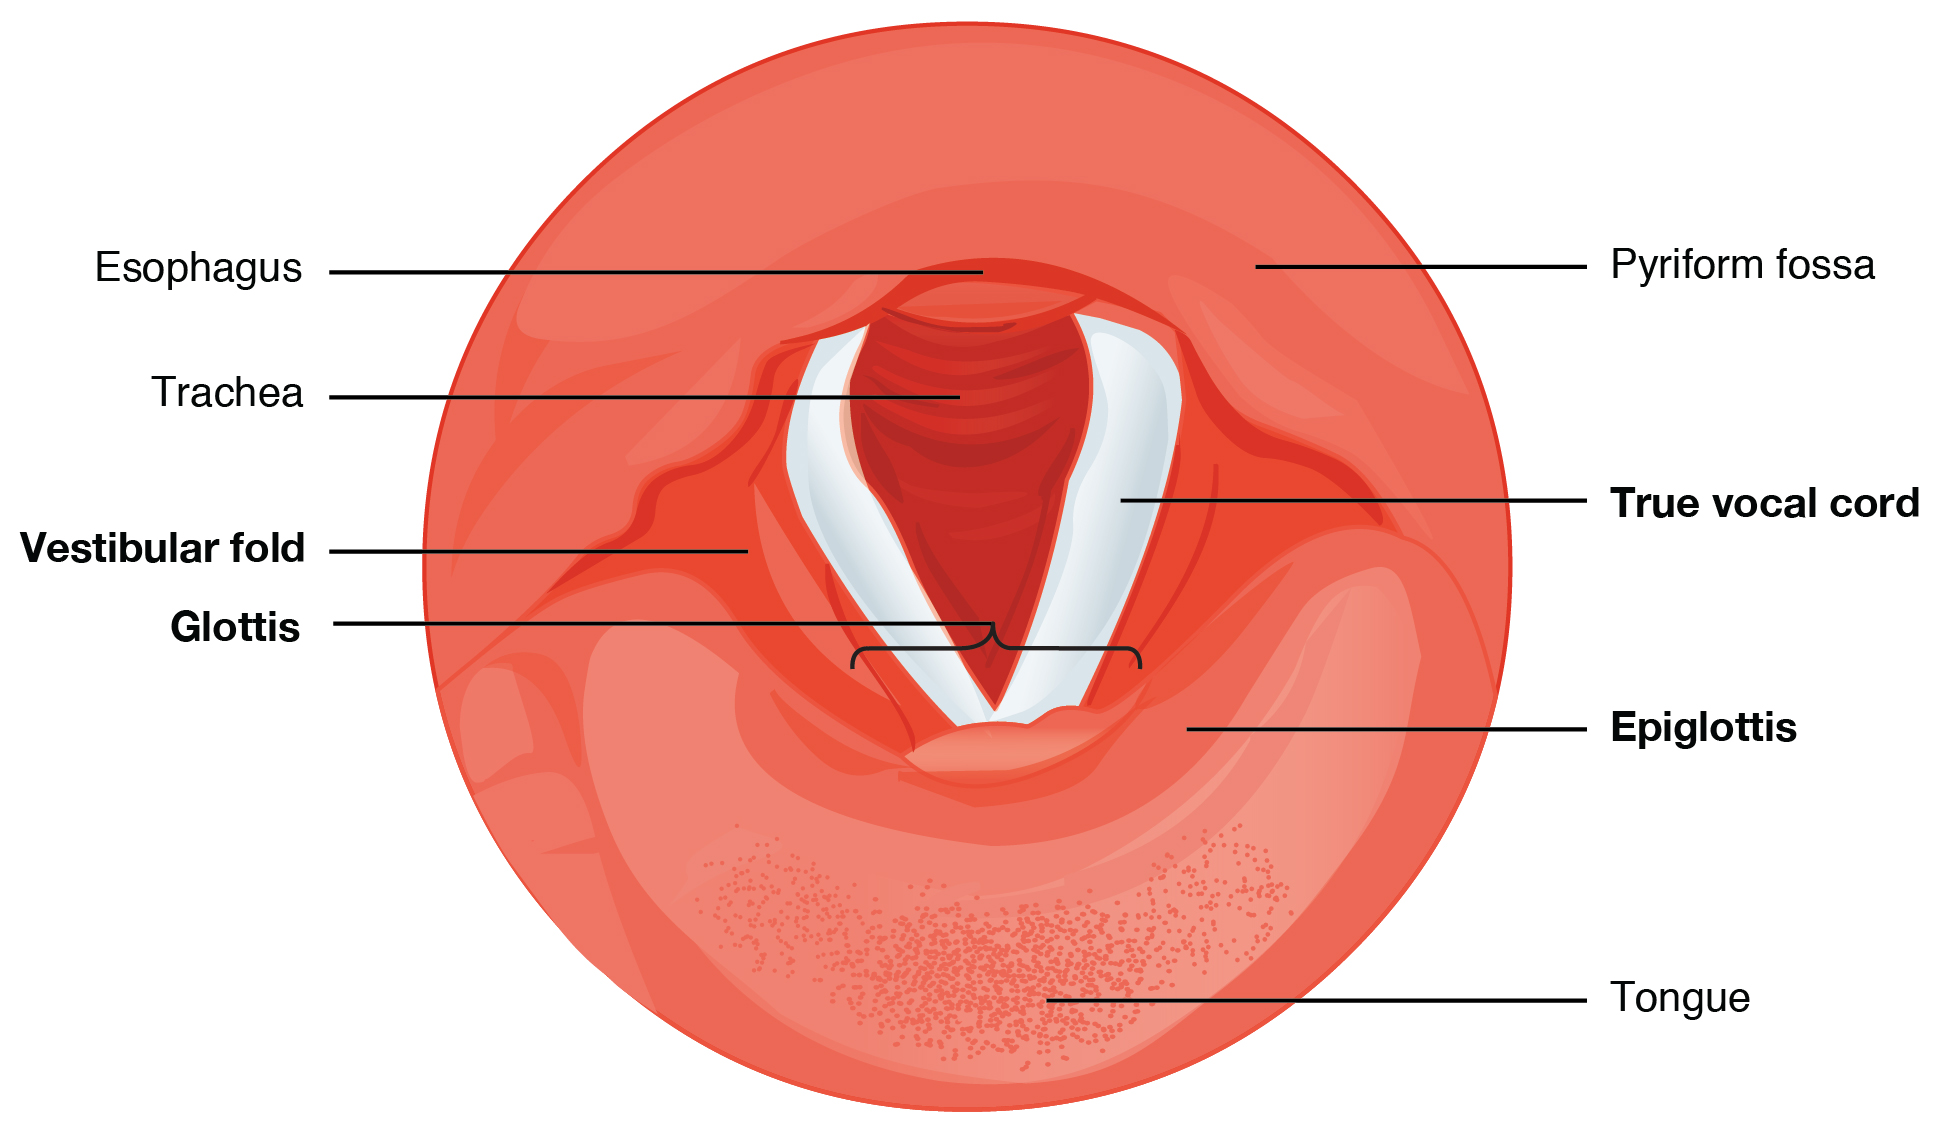 This diagram shows the cross section of the larynx. The different types of cartilages are labeled.